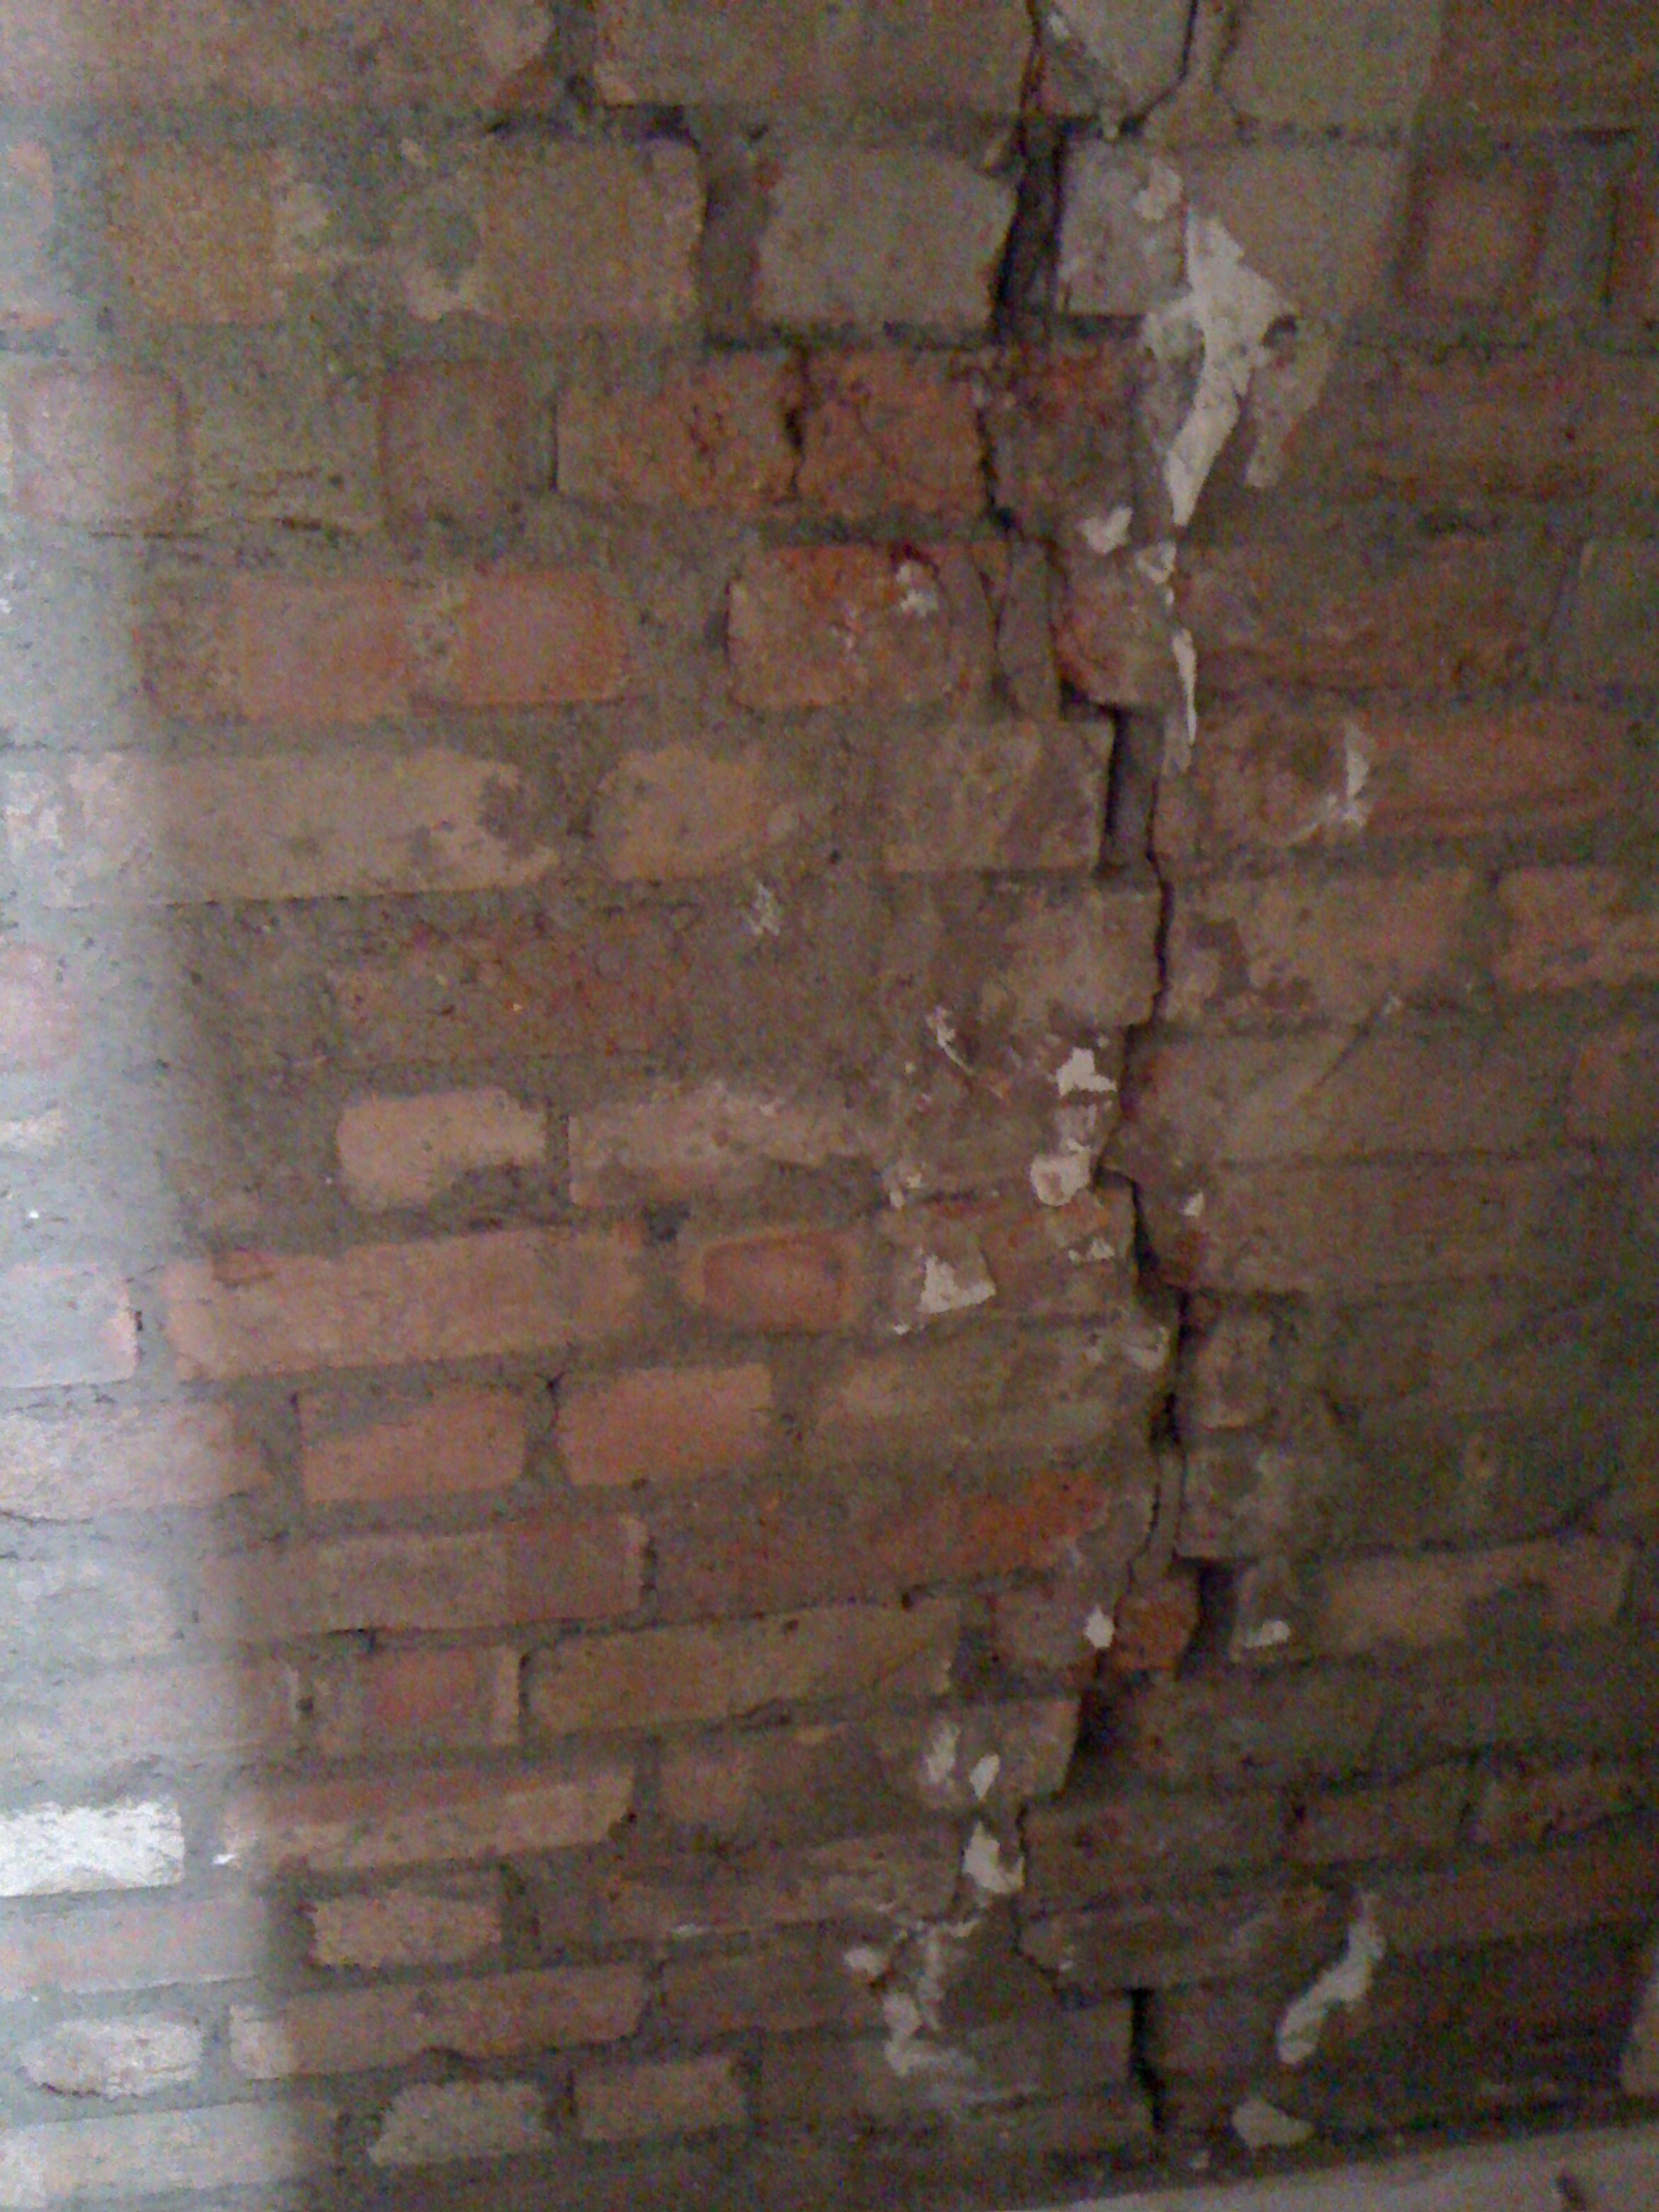 A long crack had appeared on an internal wall of the house